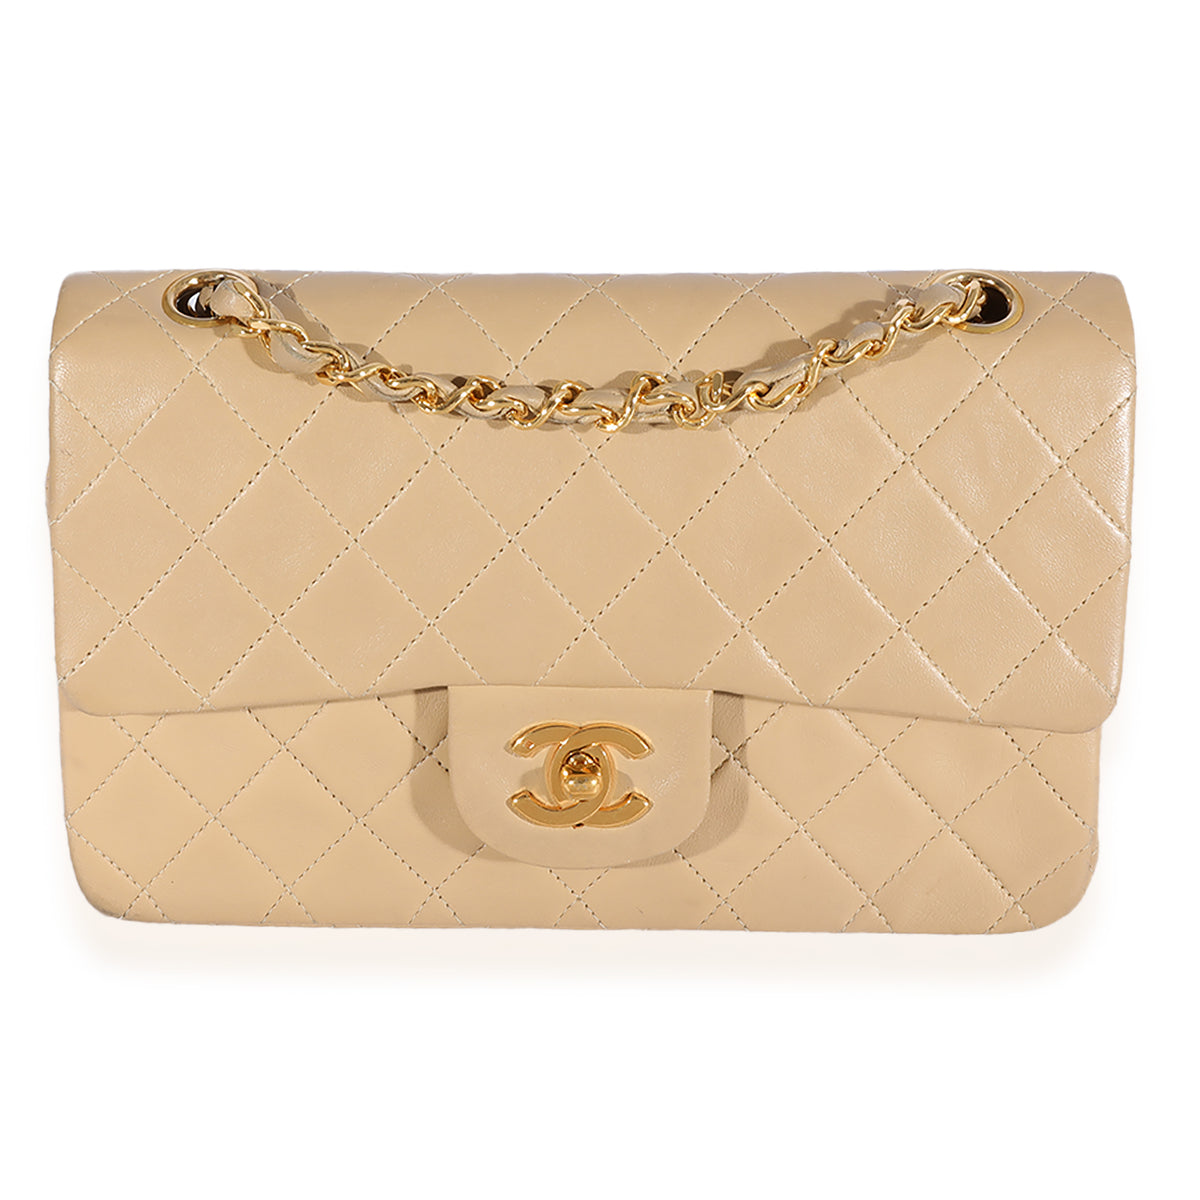 Chanel Beige Quilted Lambskin Medium Double Flap Bag Gold Hardware